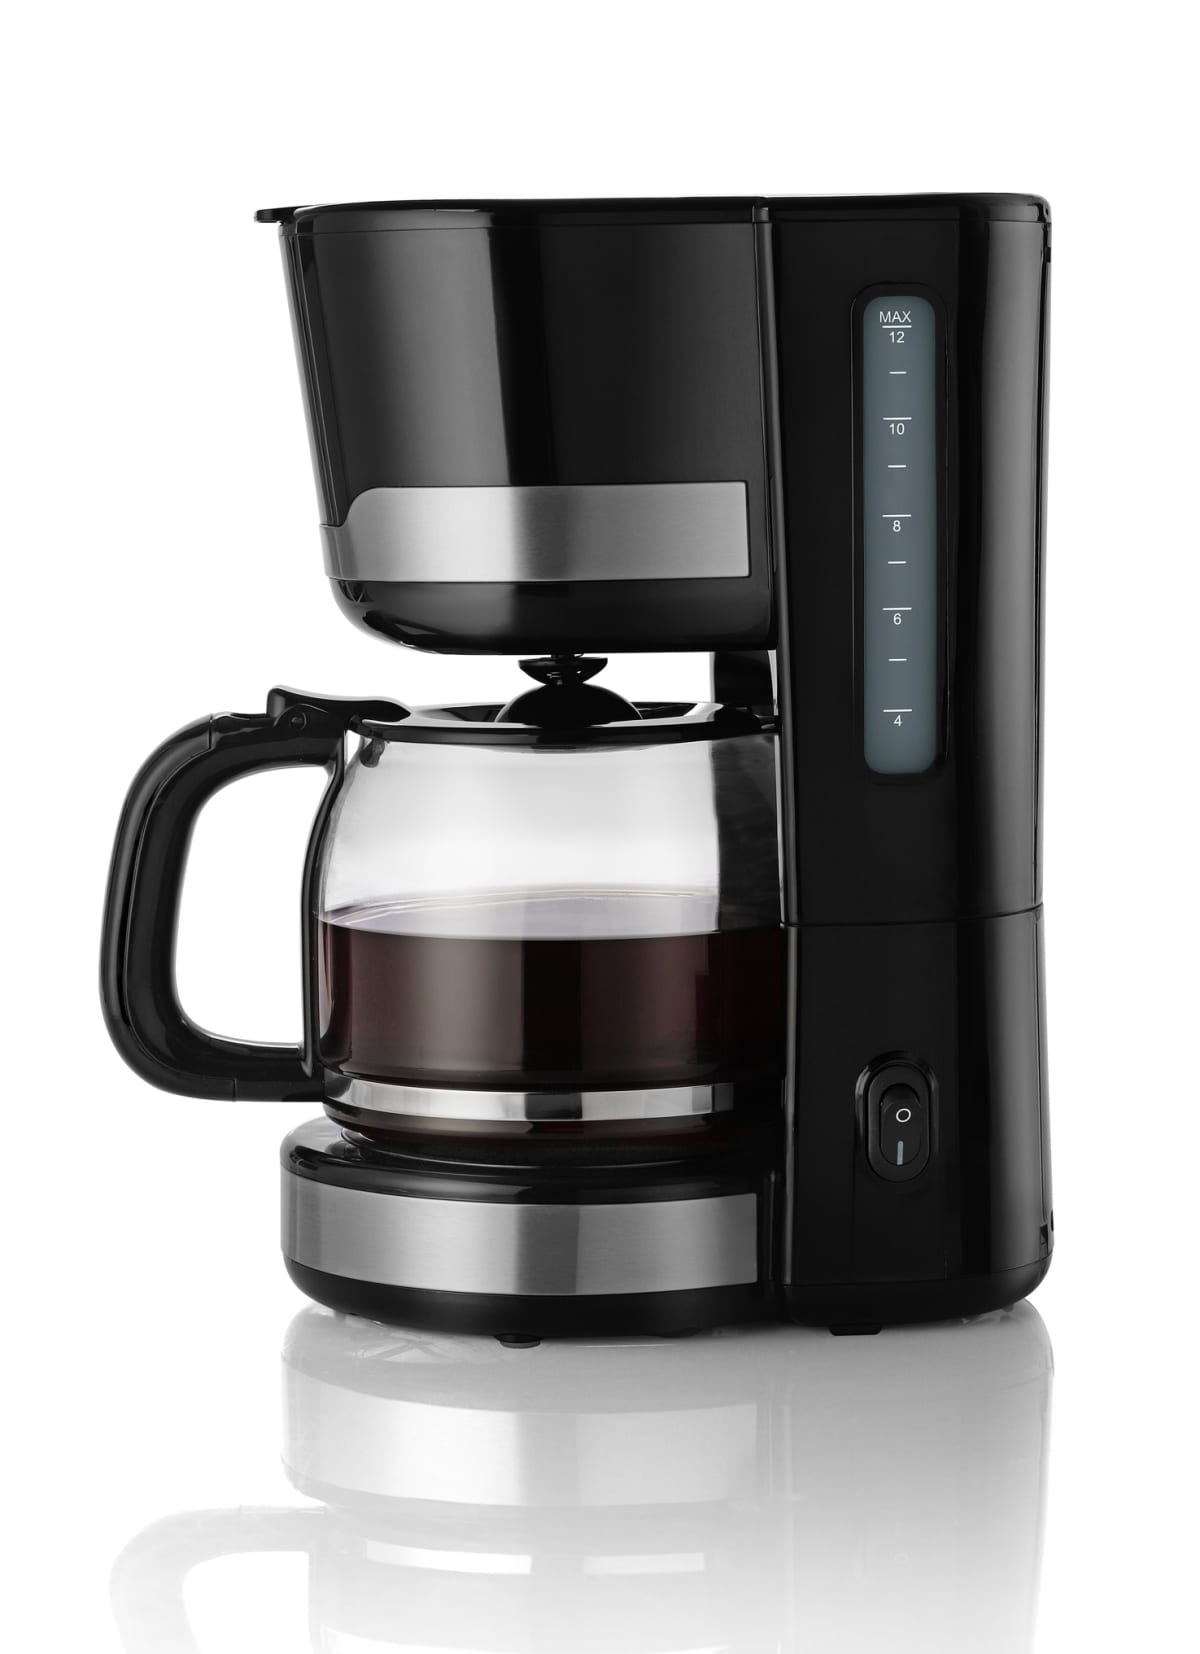 A coffee maker with coffee in the pot, against a white background.